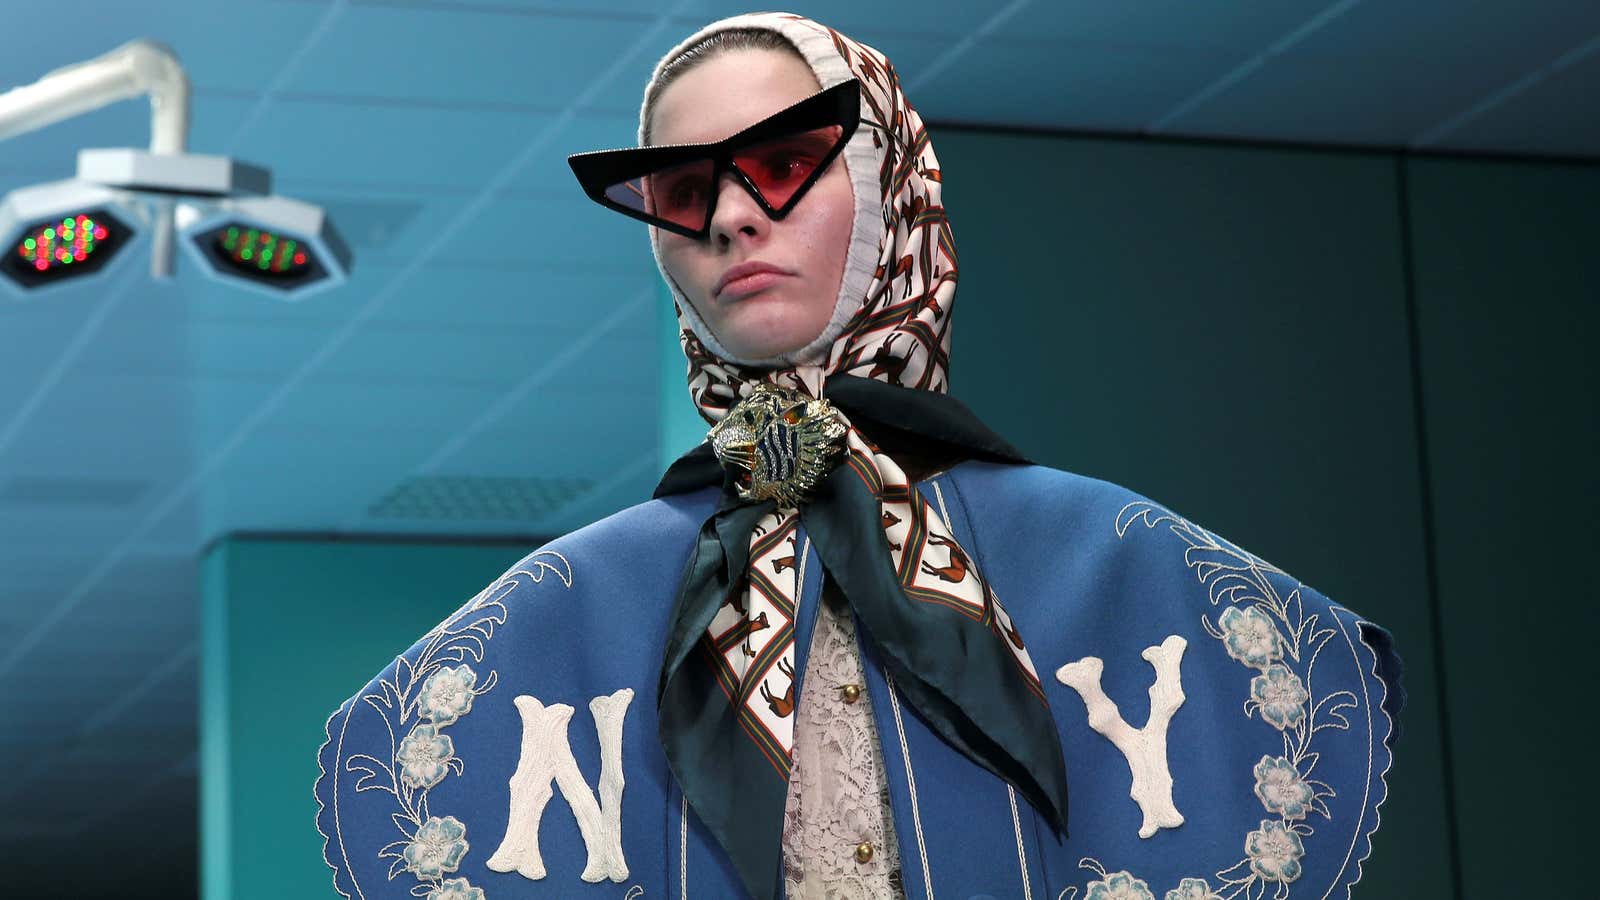 Maybe there’s a reason Gucci is all about New York lately.